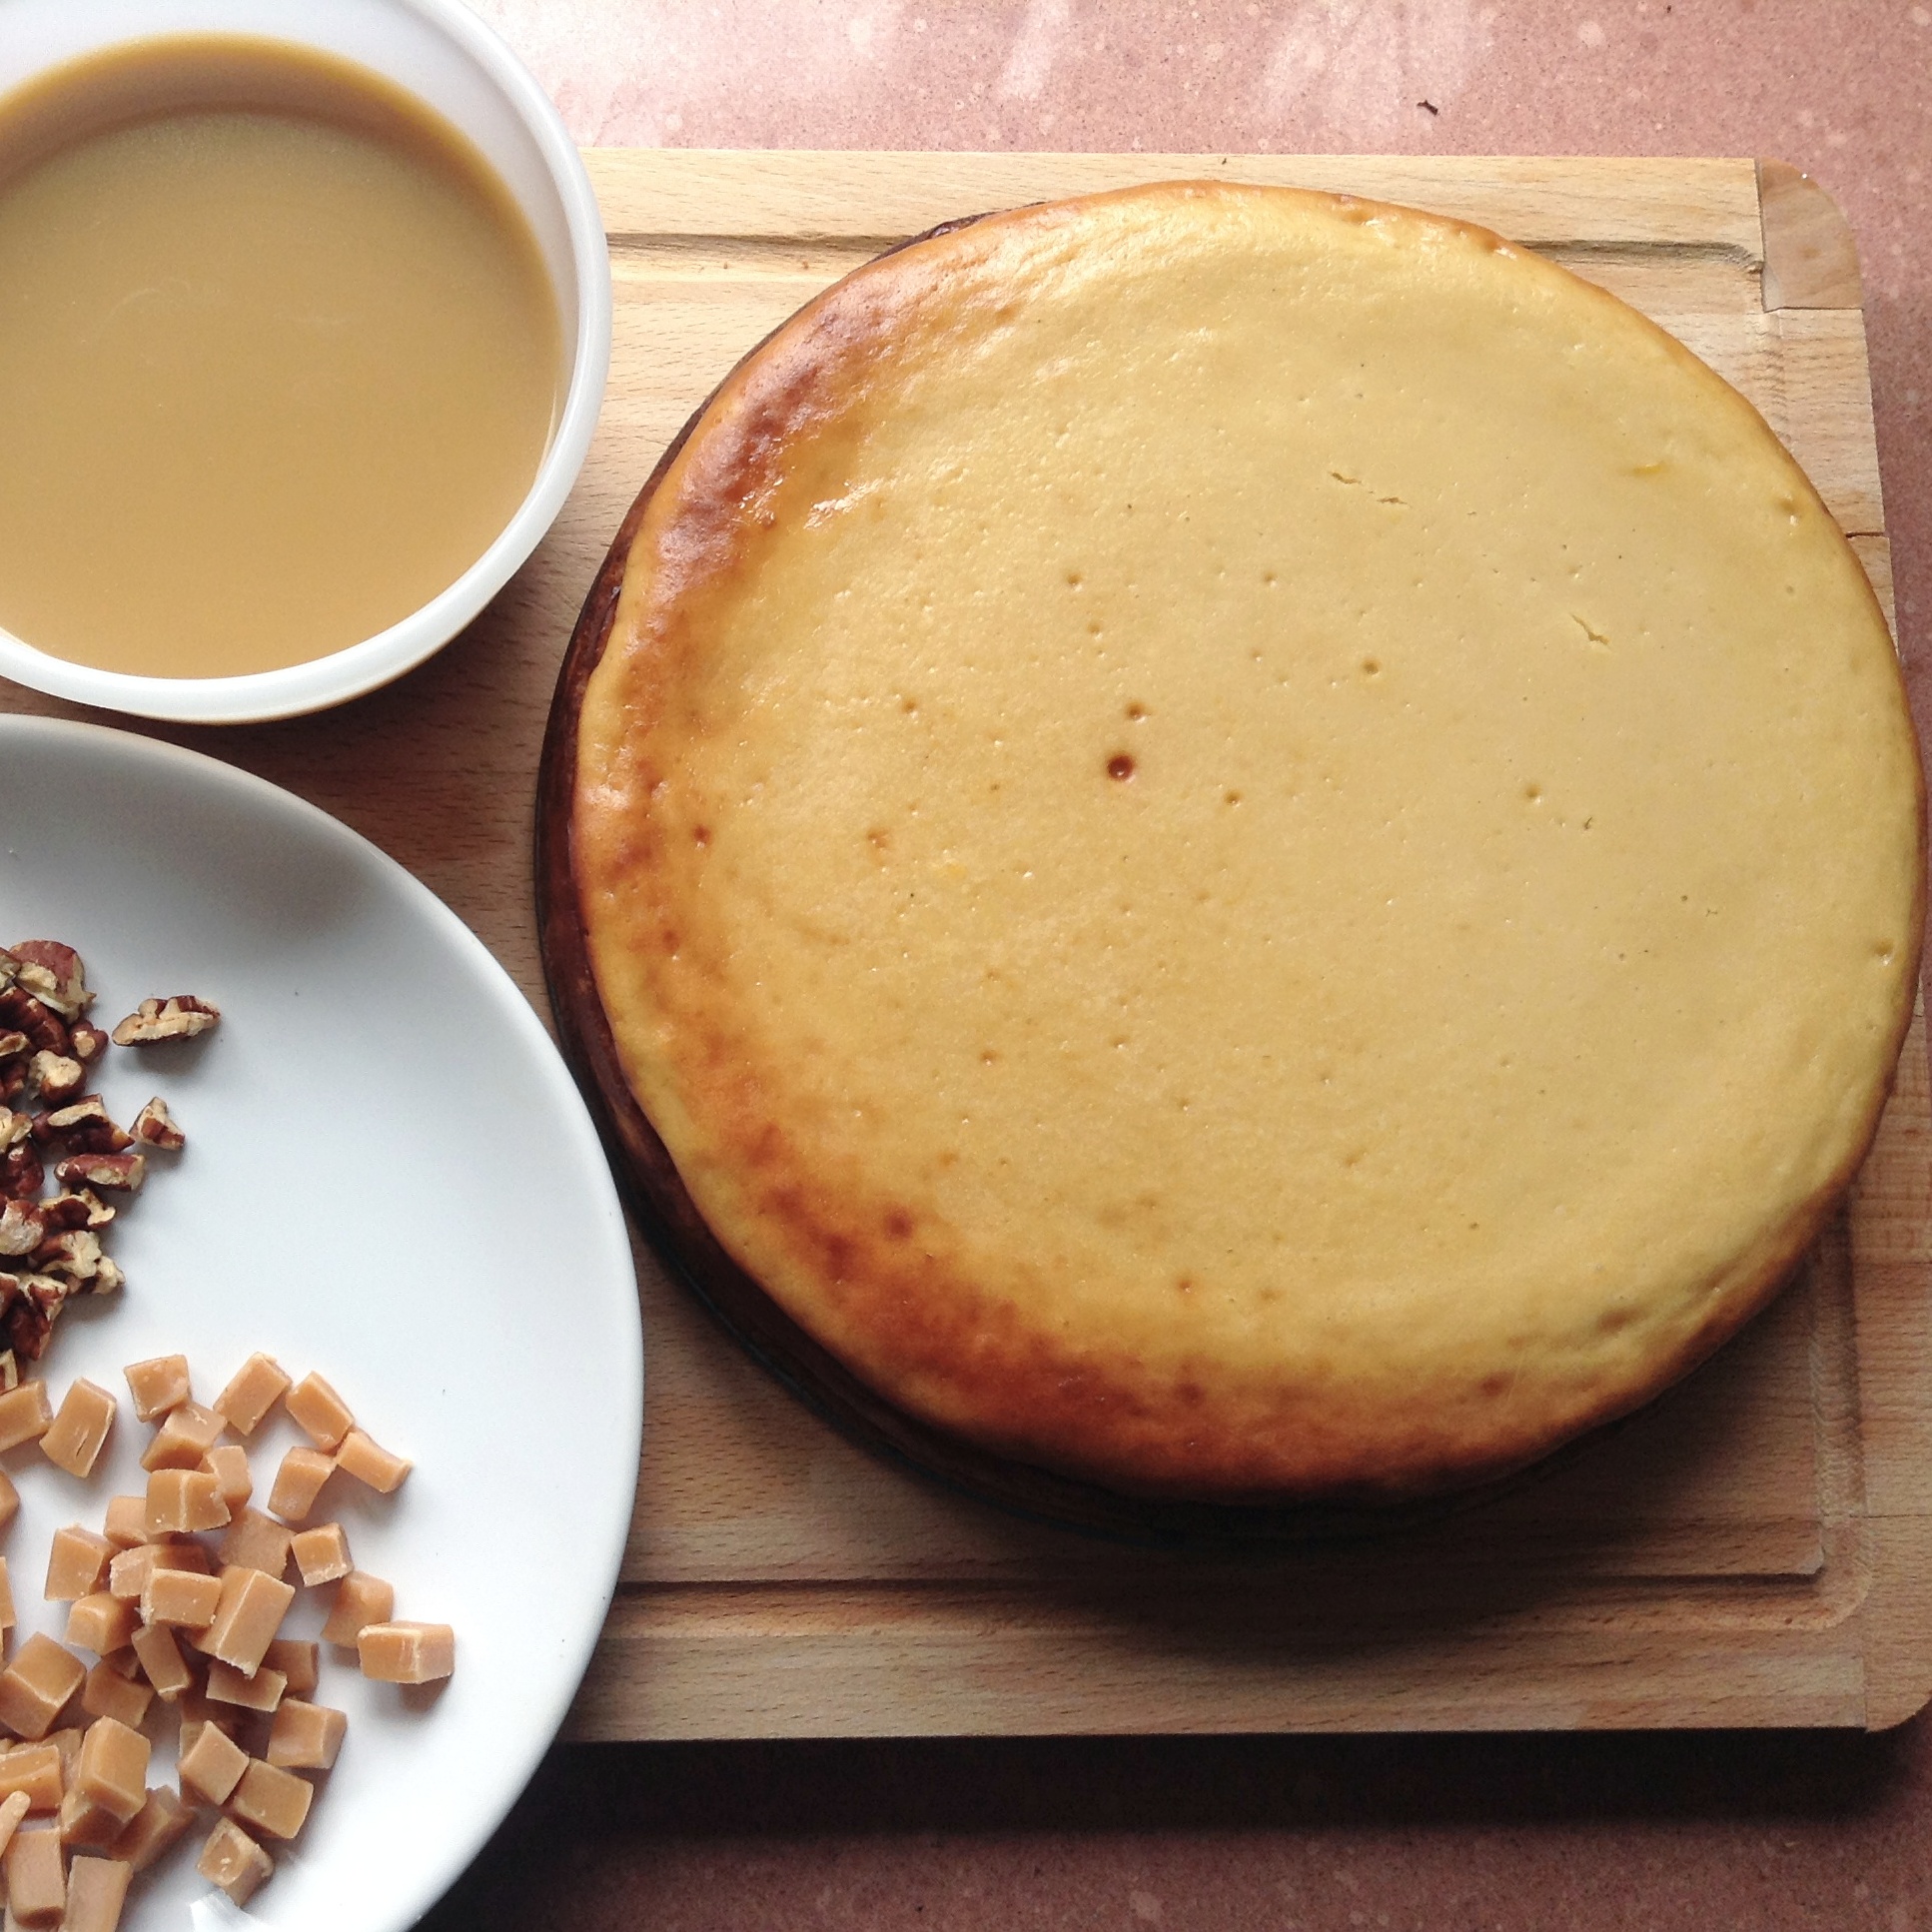 Baked cheesecake with toffee & pecan nuts assembly